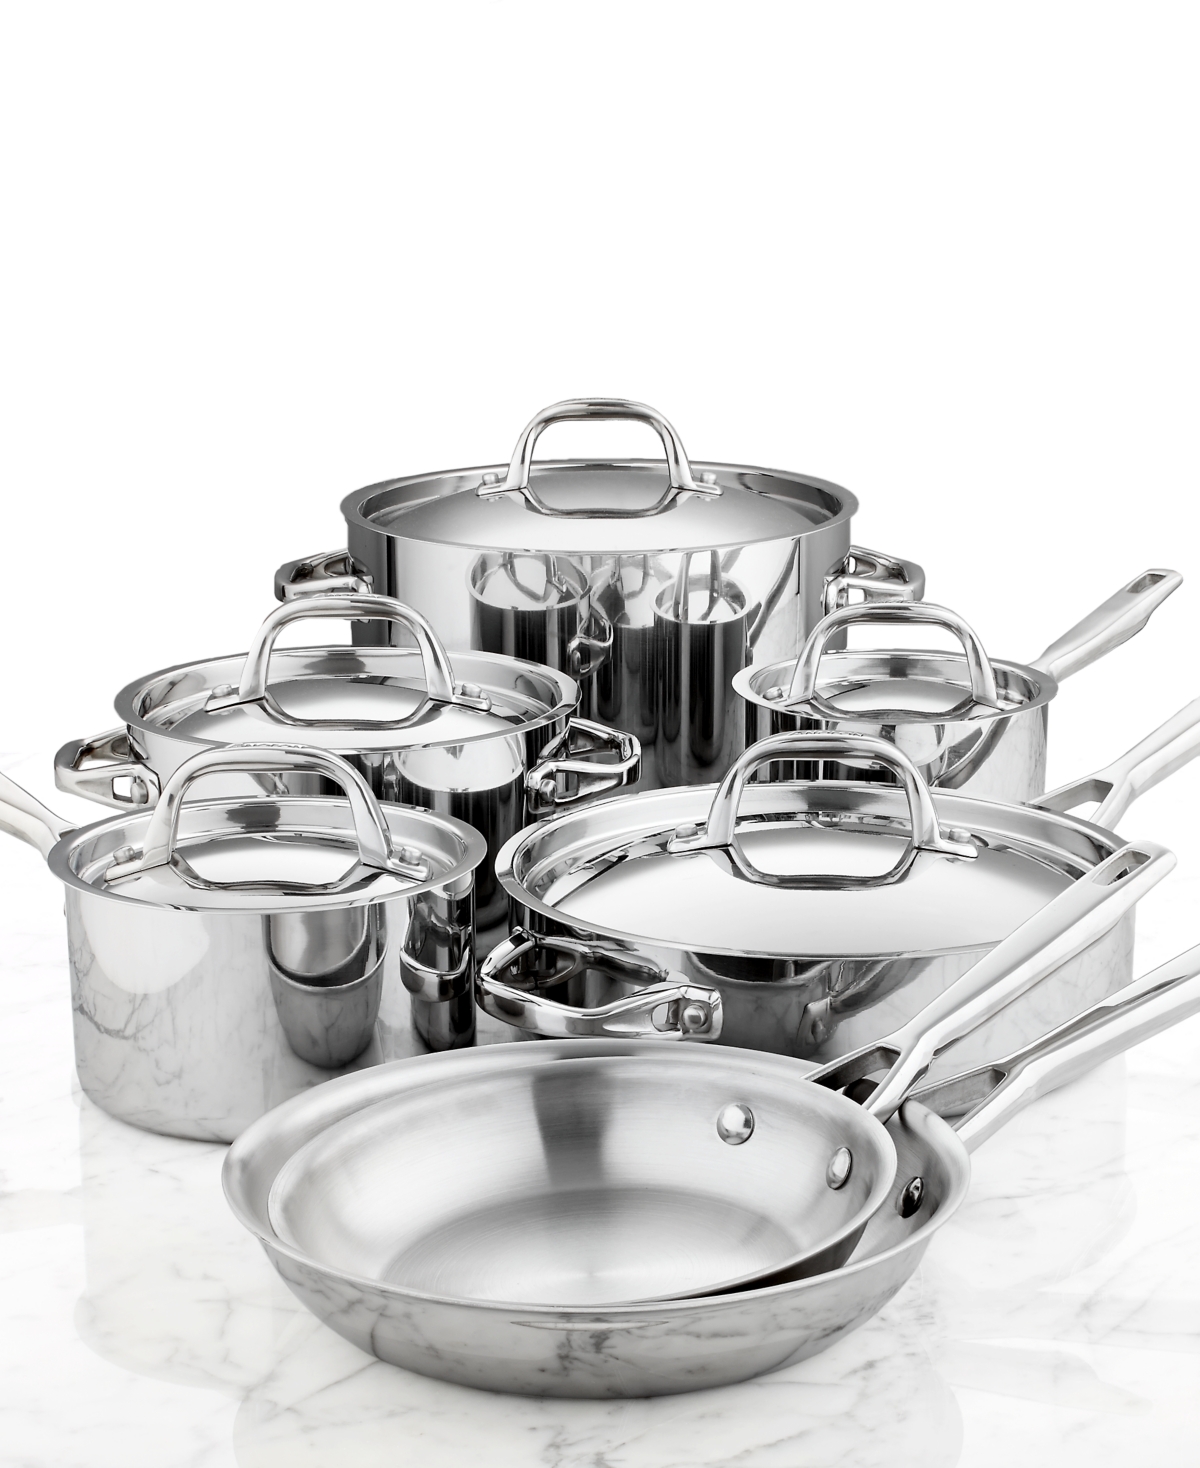 Anolon Tri-Ply Stainless Steel 12 Piece Cookware Set